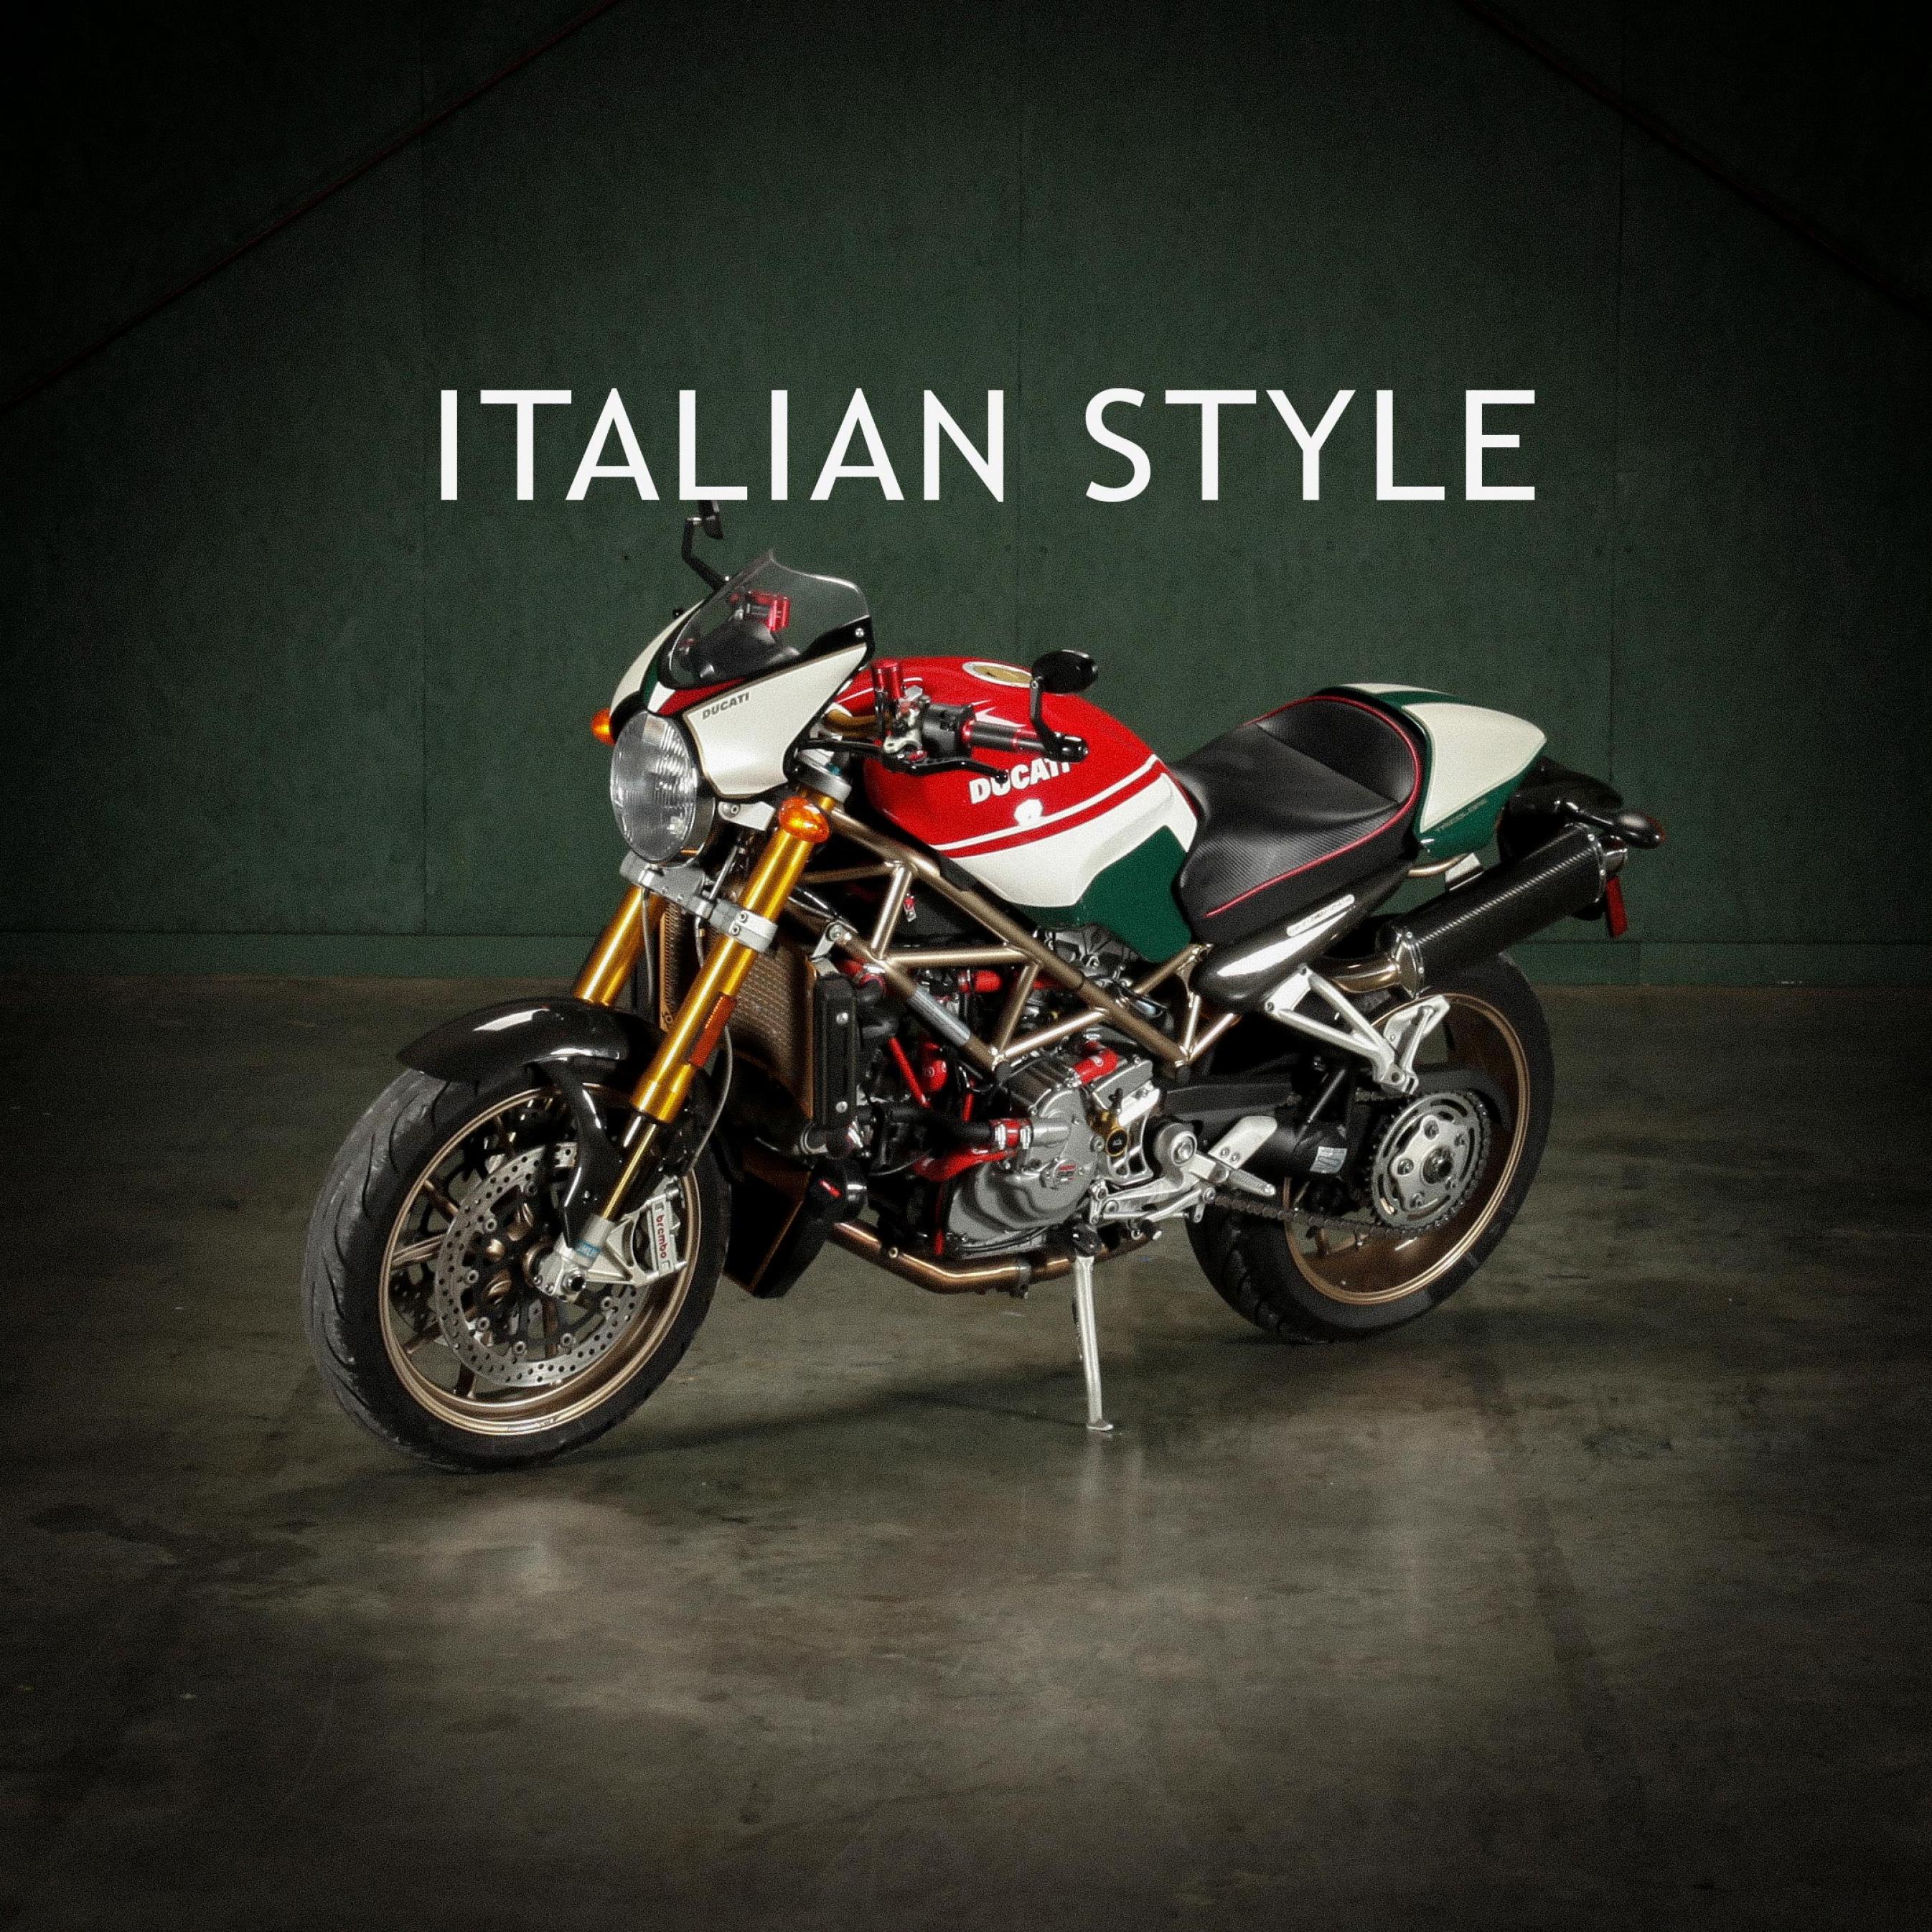 italian-style-the-limited-edition-ducati-tricolore-monster